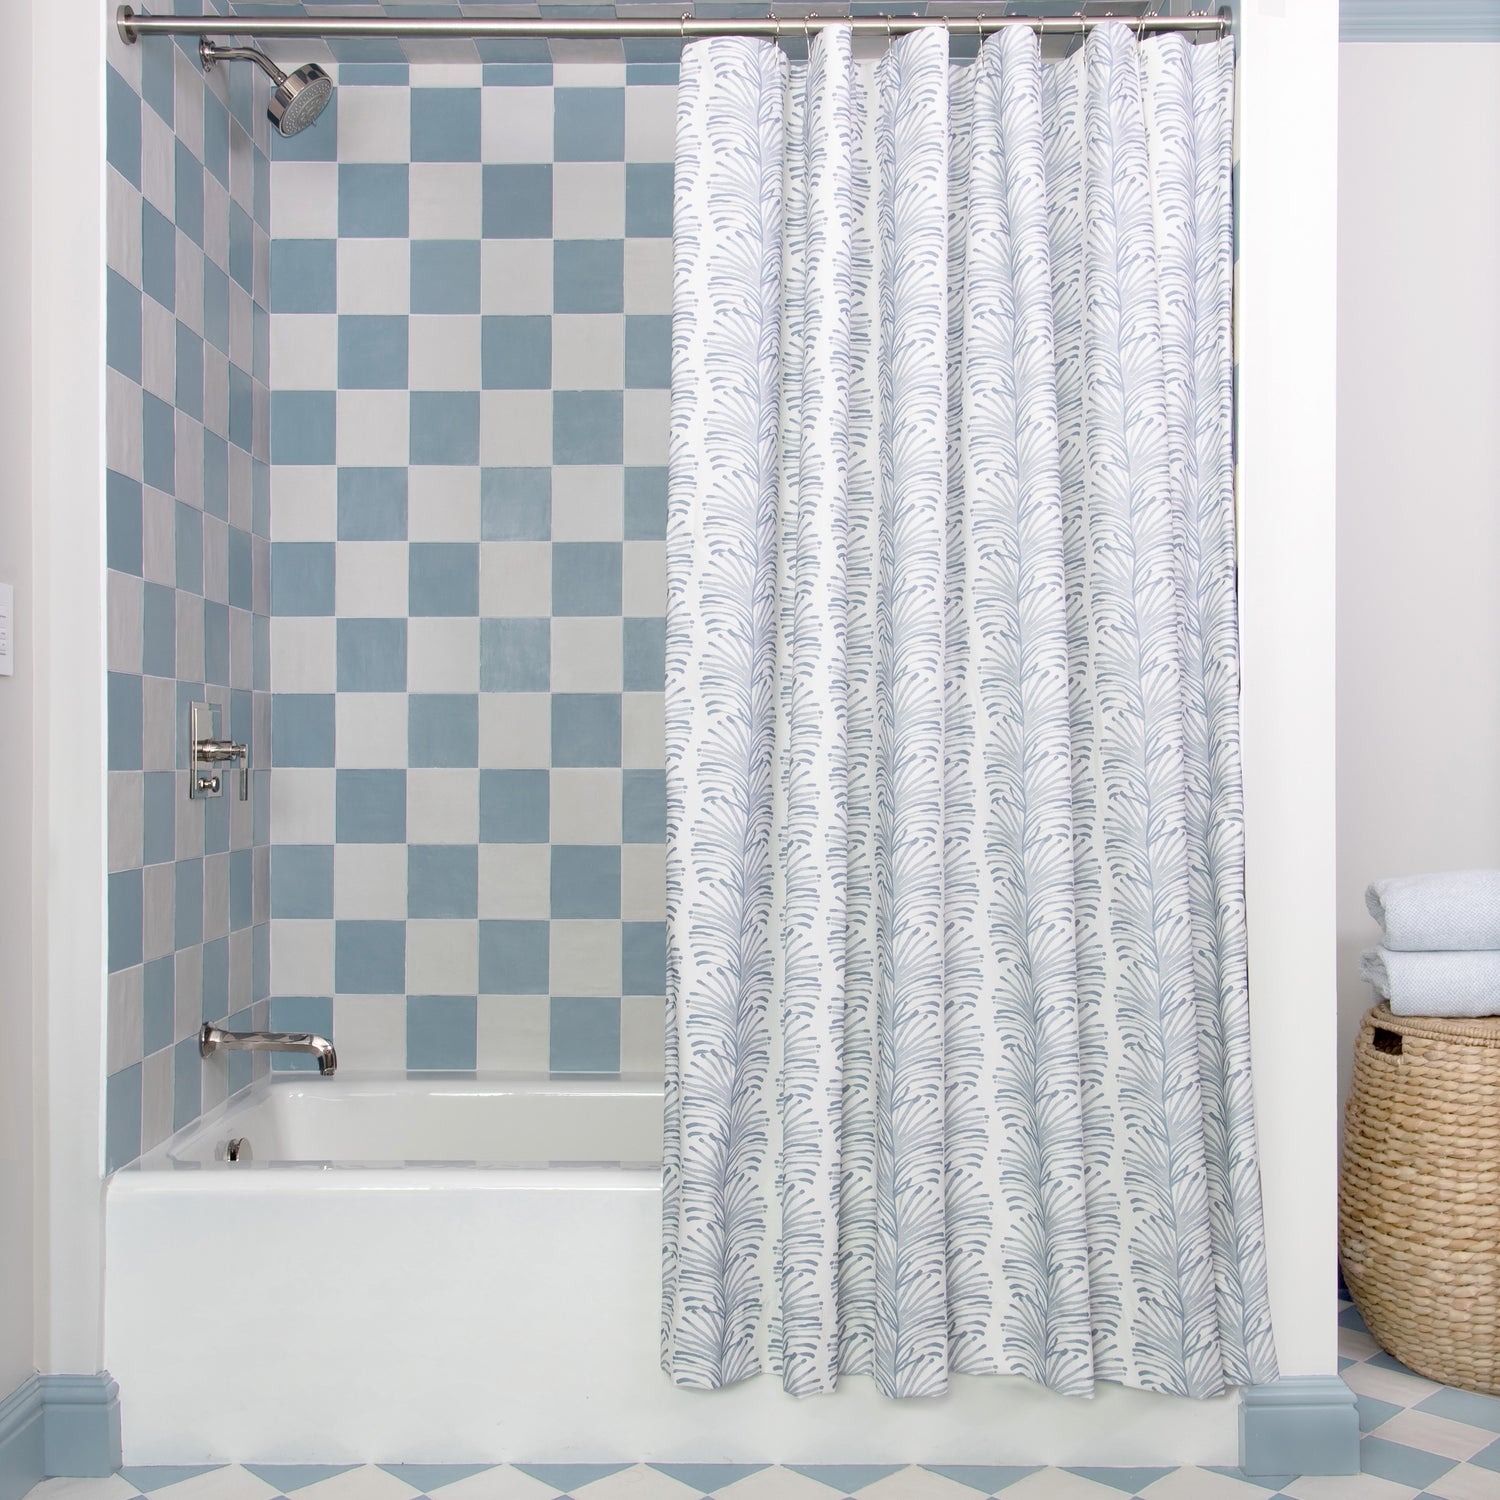 Bath styled with Sky Blue Botanical Stripe Shower Curtain on metal rod with blue and white checkered wallpaper